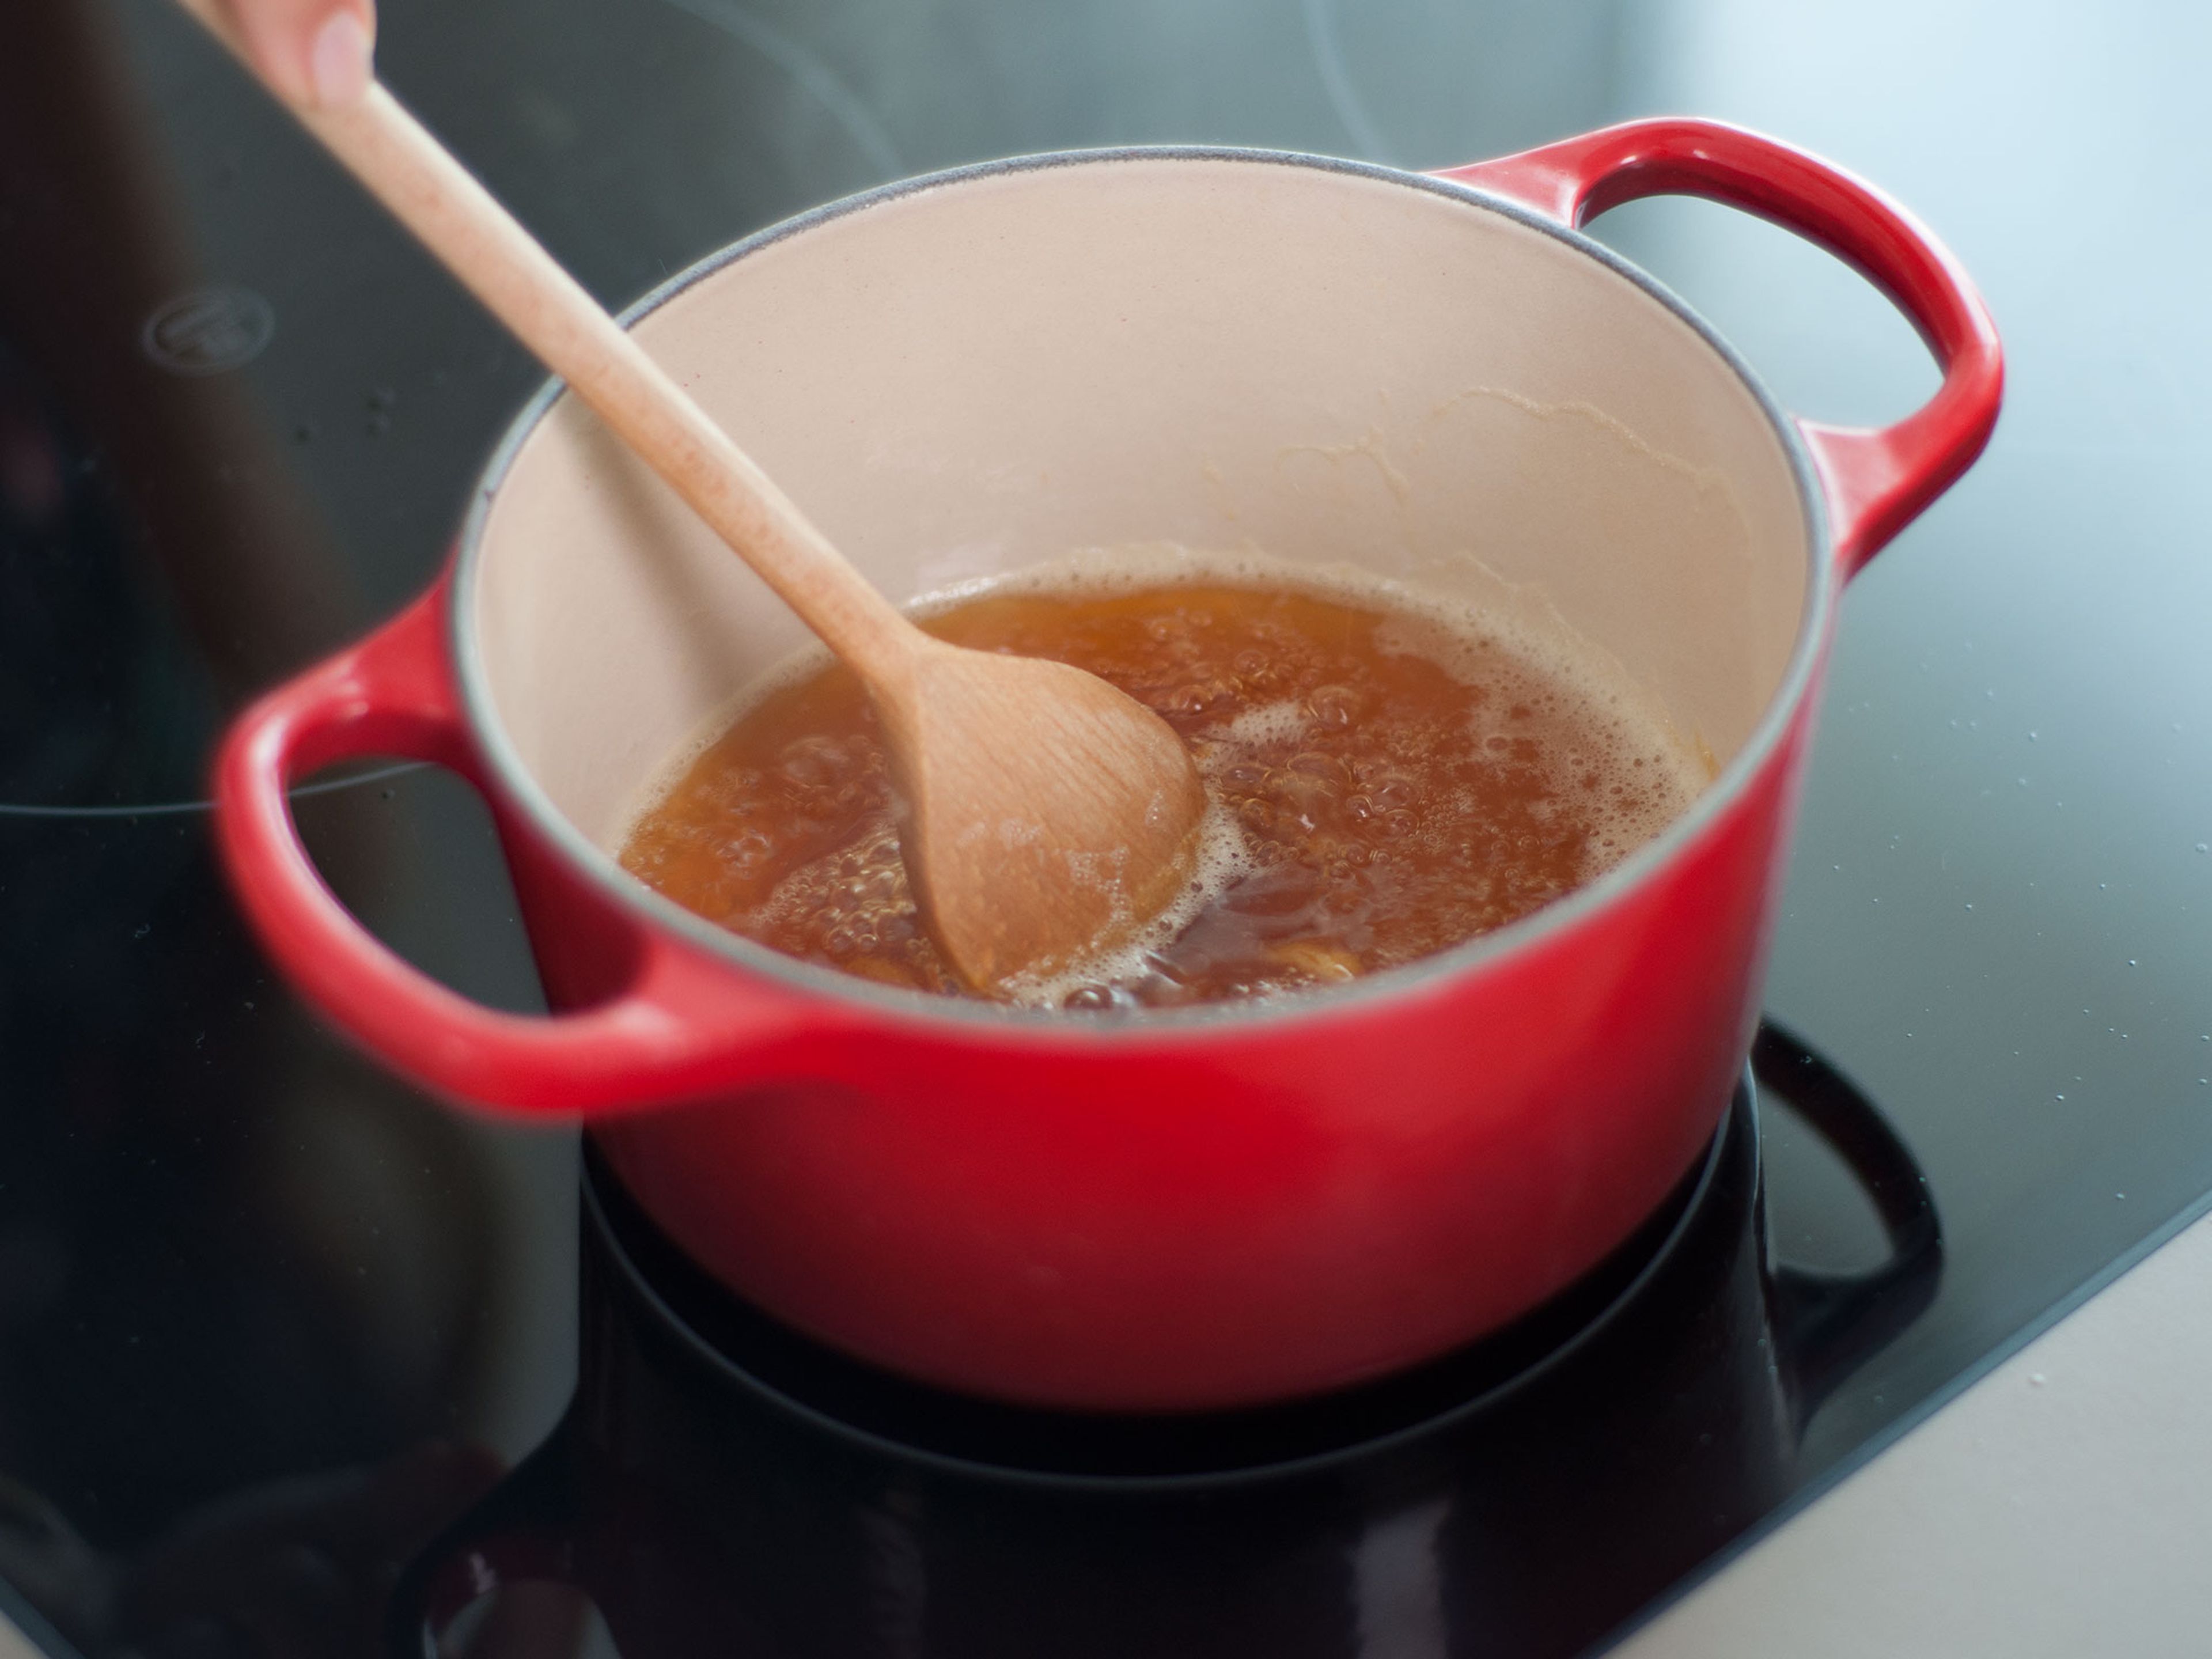 In a small saucepan, caramelize sugar over medium-low heat until slightly thickened and amber in color. Deglaze with lemon juice.